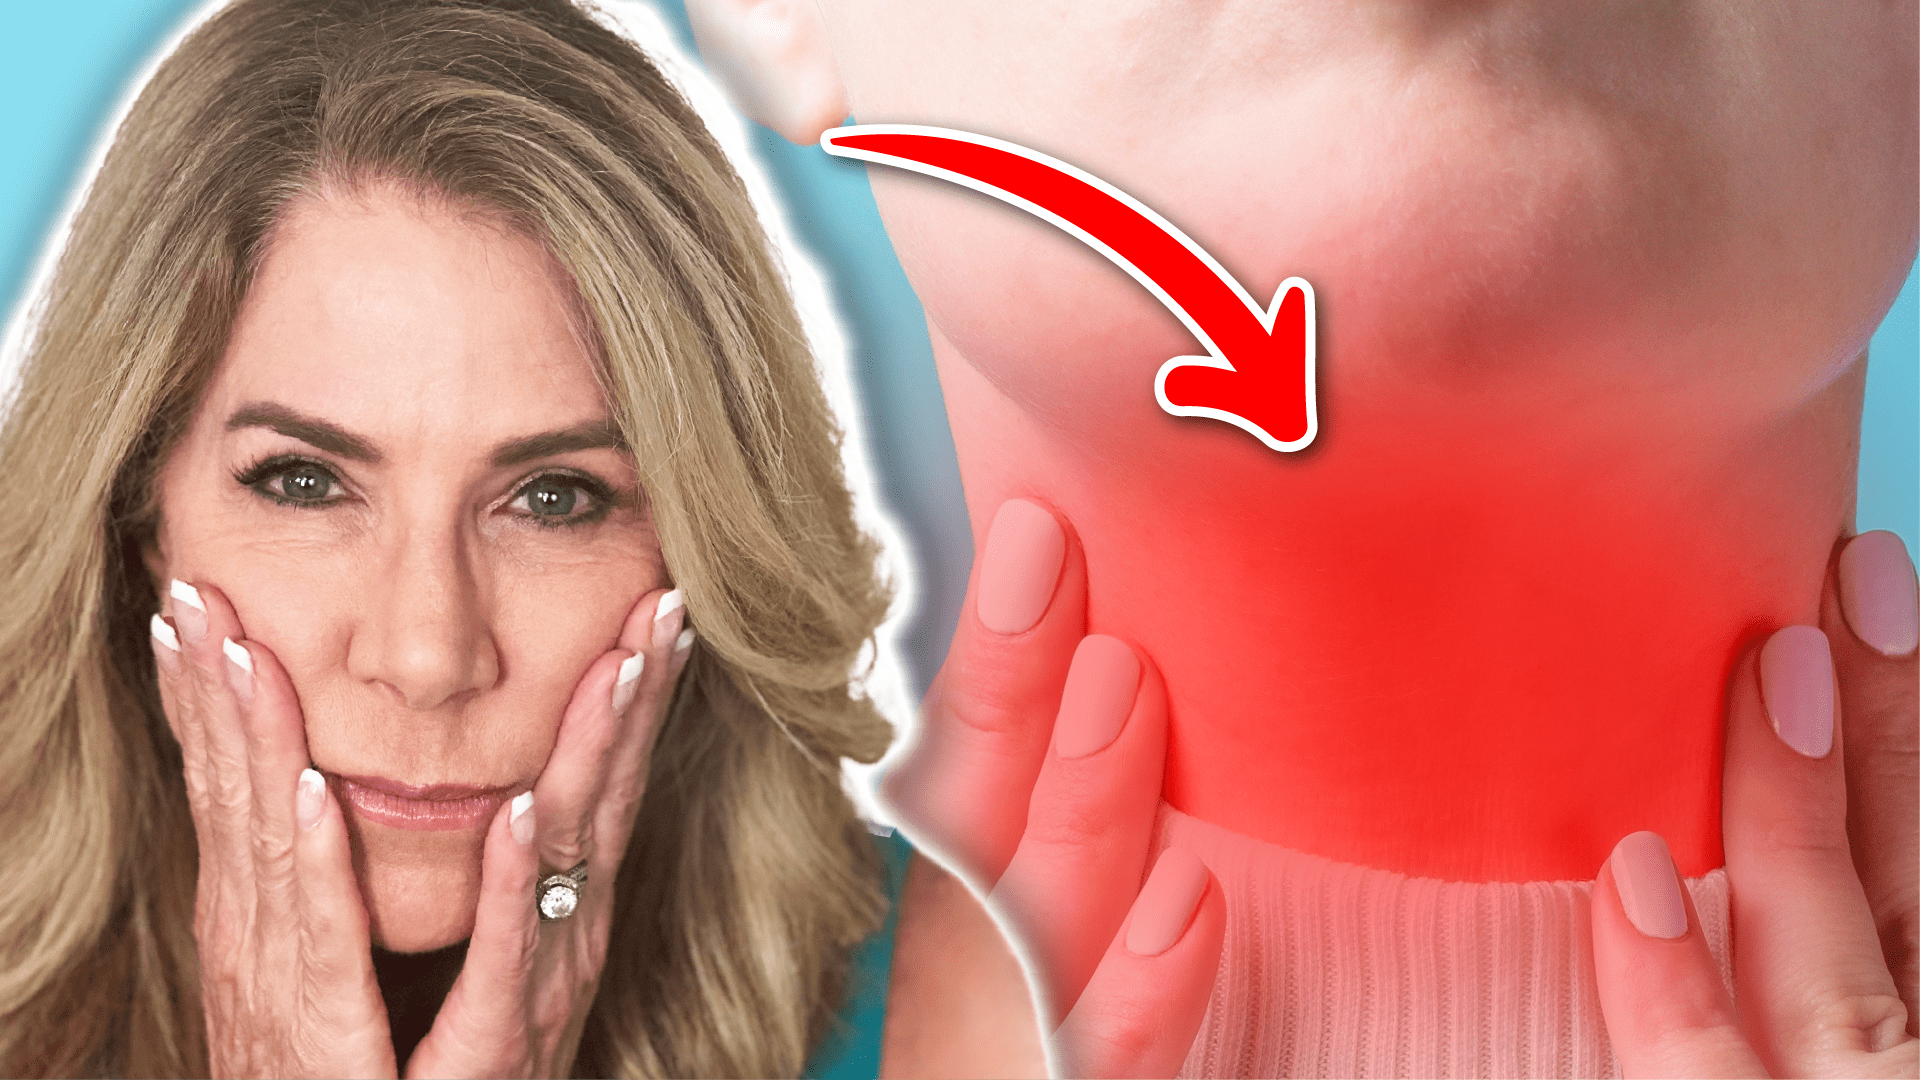 10 Warning Signs of Hypothyroidism (Signs of Low Thyroid) | Ep. 546